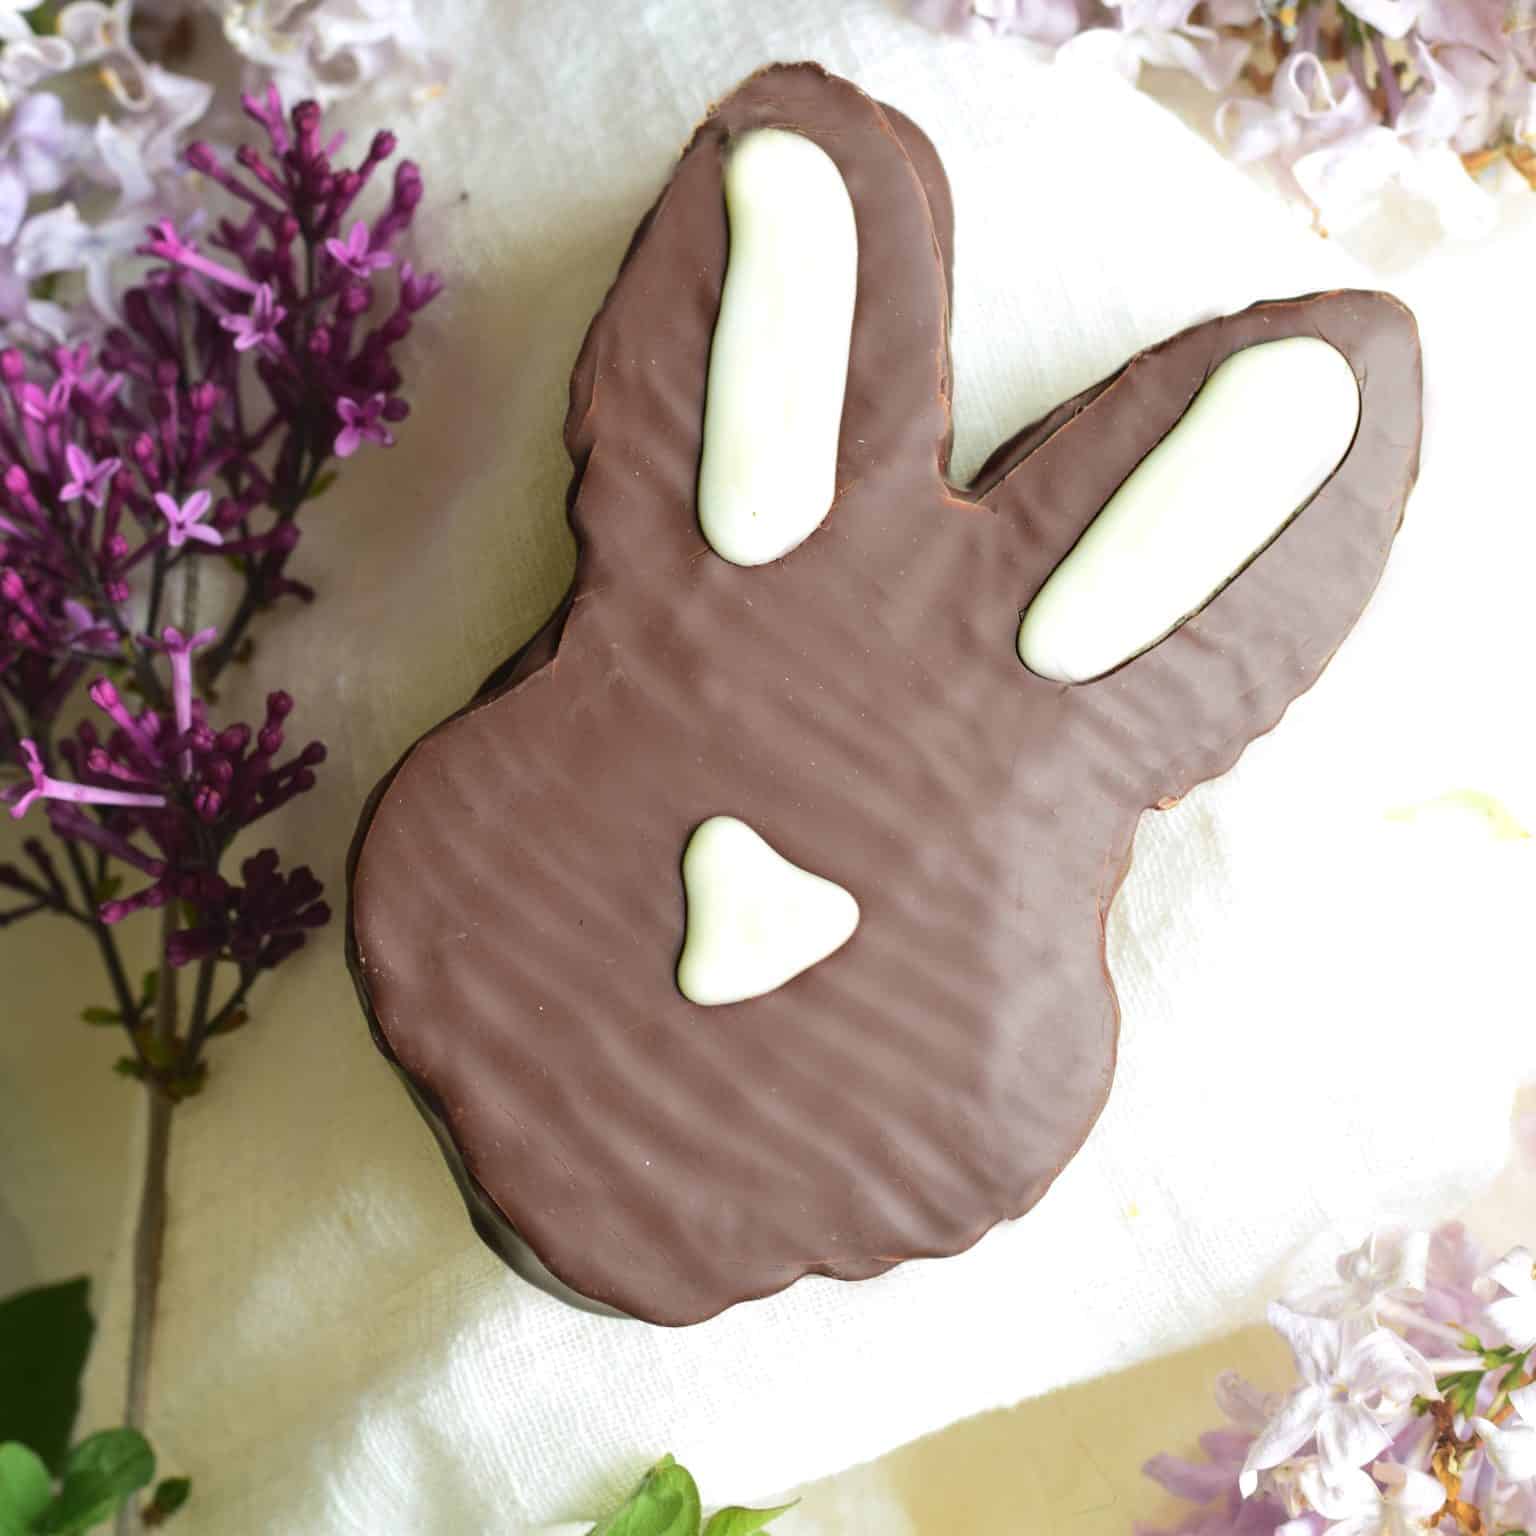 Head-shaped Easter bunny that is covered in gourmet dark chocolate and filled with vanilla bean marshmallow. white chocolate is piped to represent the ears and nose.